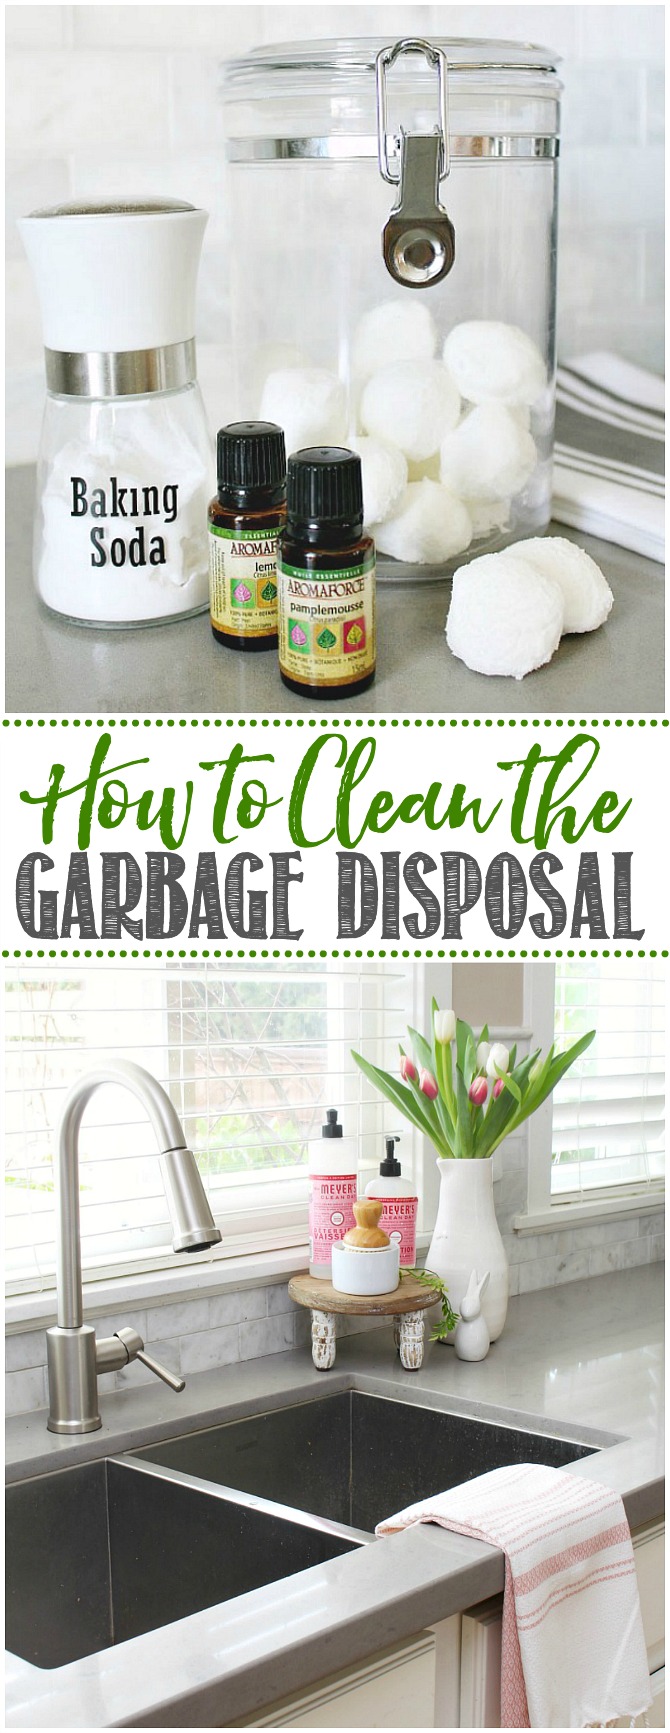 How to Clean the Garbage Disposal. DIY Garbage disposal cleaning pods in a farmhouse style kitchen.